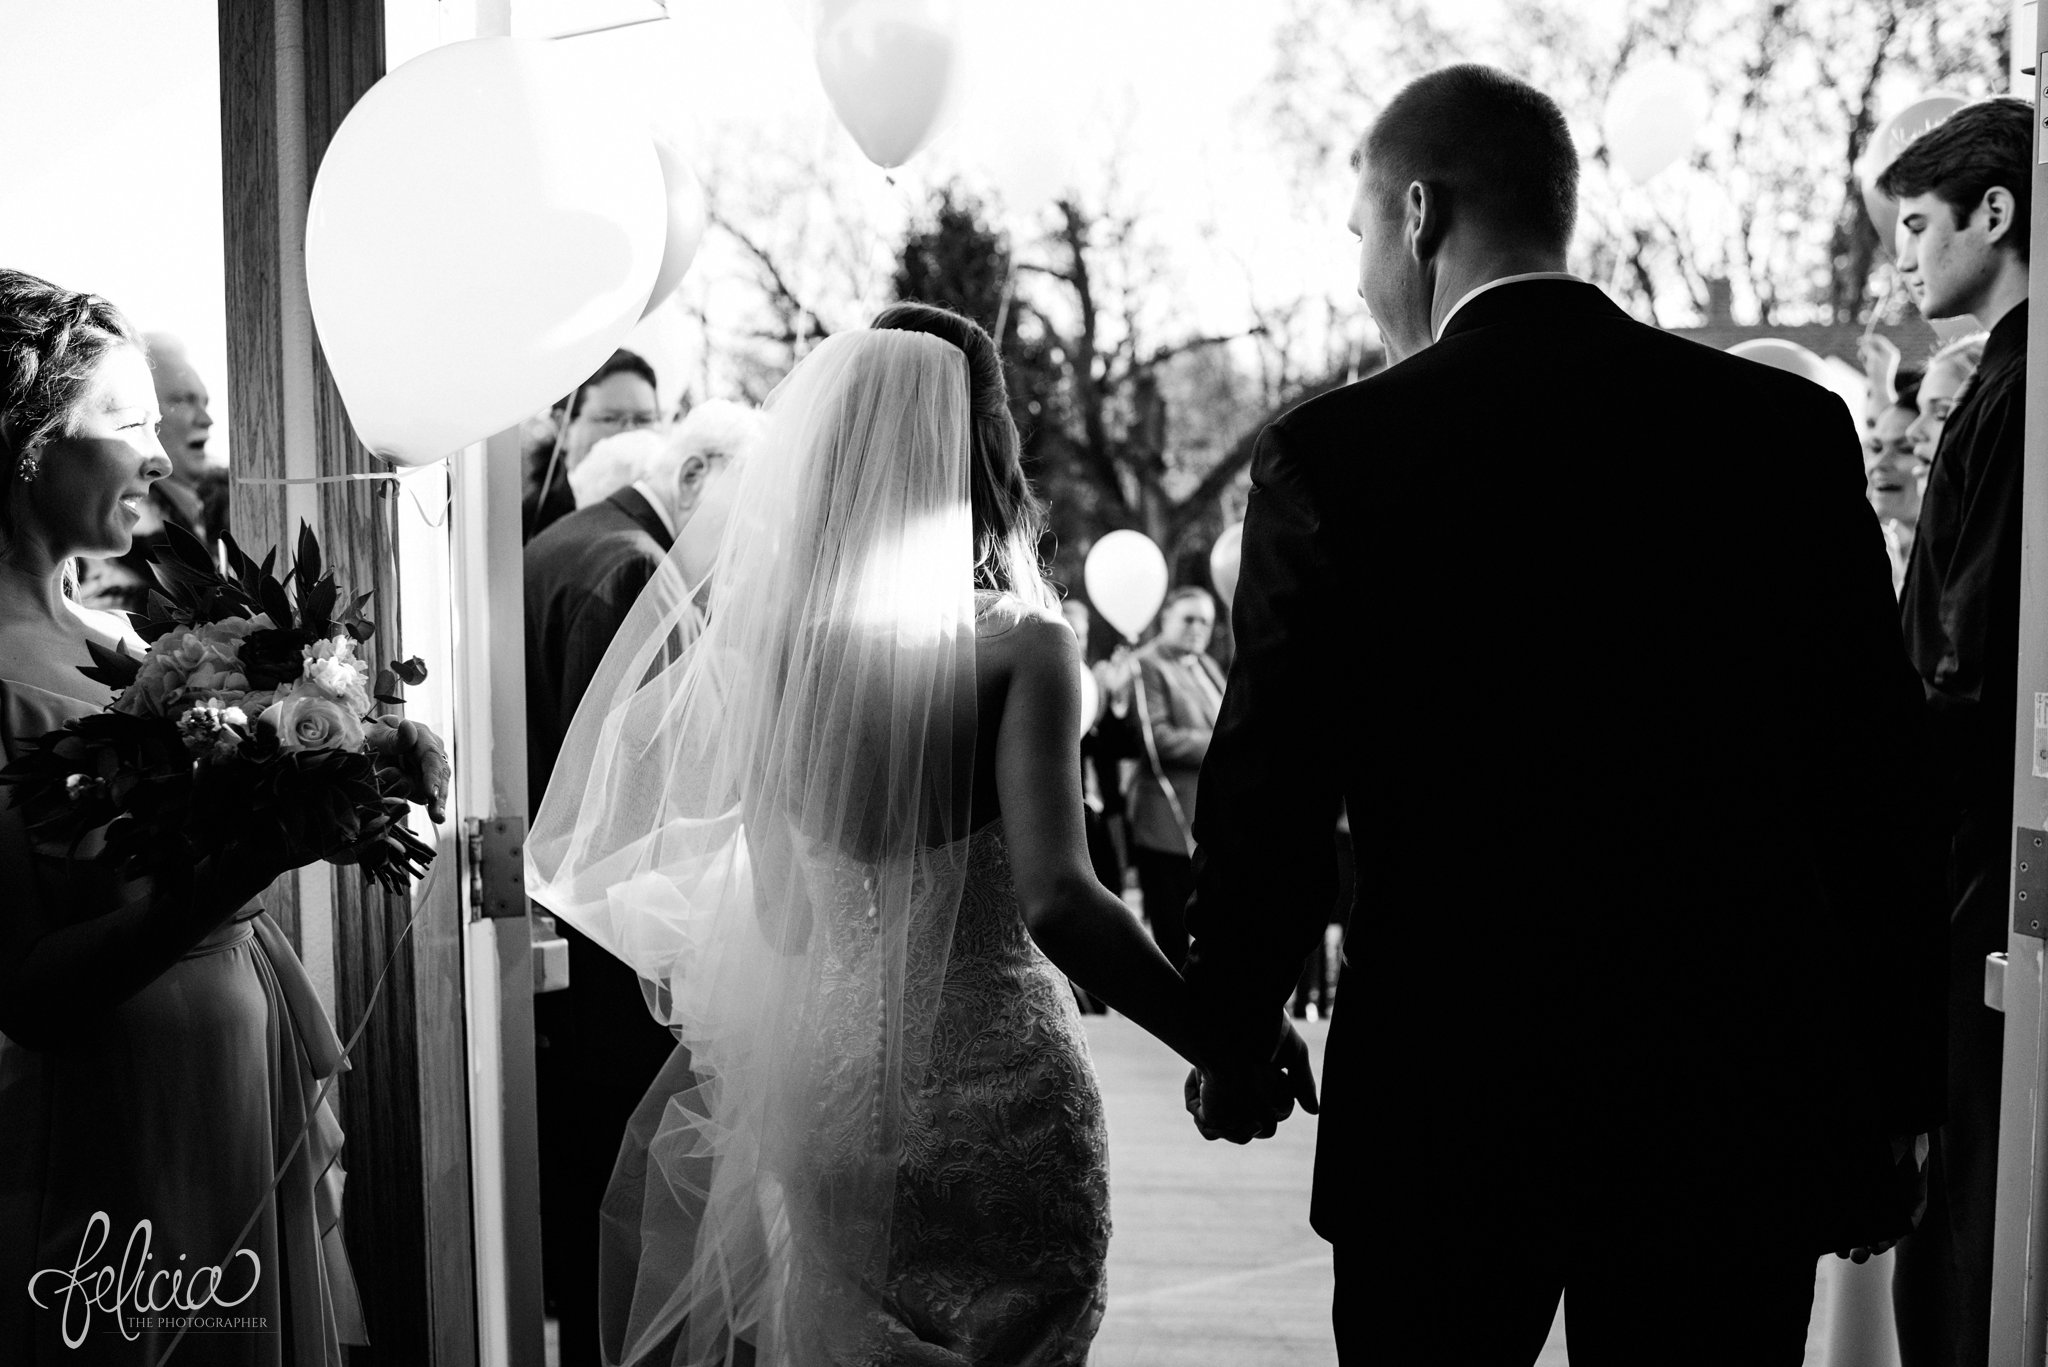 black and white | wedding | wedding photos | industrial | Rumely Event Space | wedding photography | images by feliciathephotographer.com | West Bottoms | wedding ceremony | The Providence Baptist Church | bride and groom | Mr. and Mrs. | walking down the aisle | exiting the church | open church doors | holding hands 